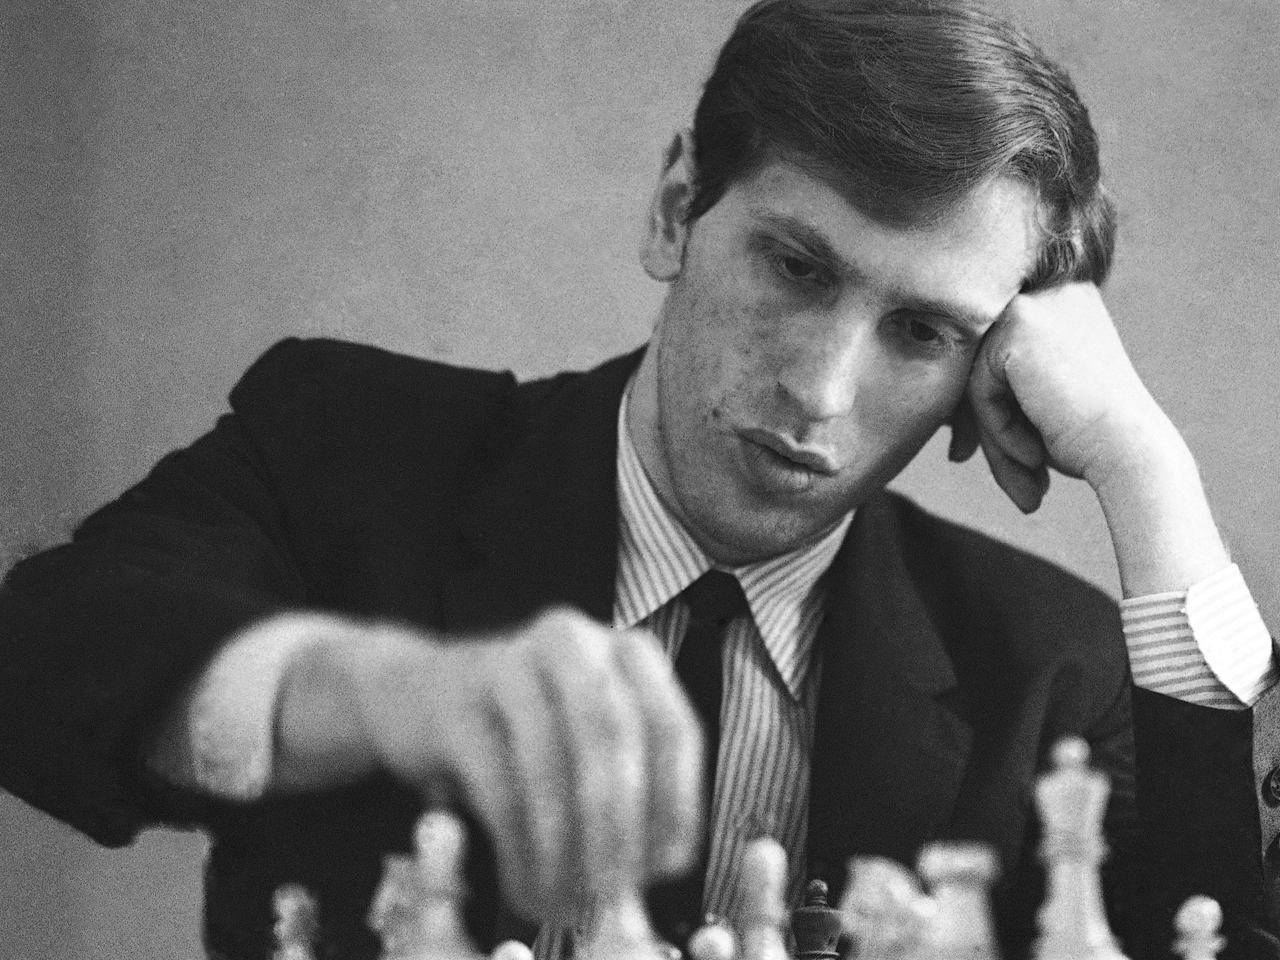 ▷ Best chess players in the world - #1 exquisite players in the